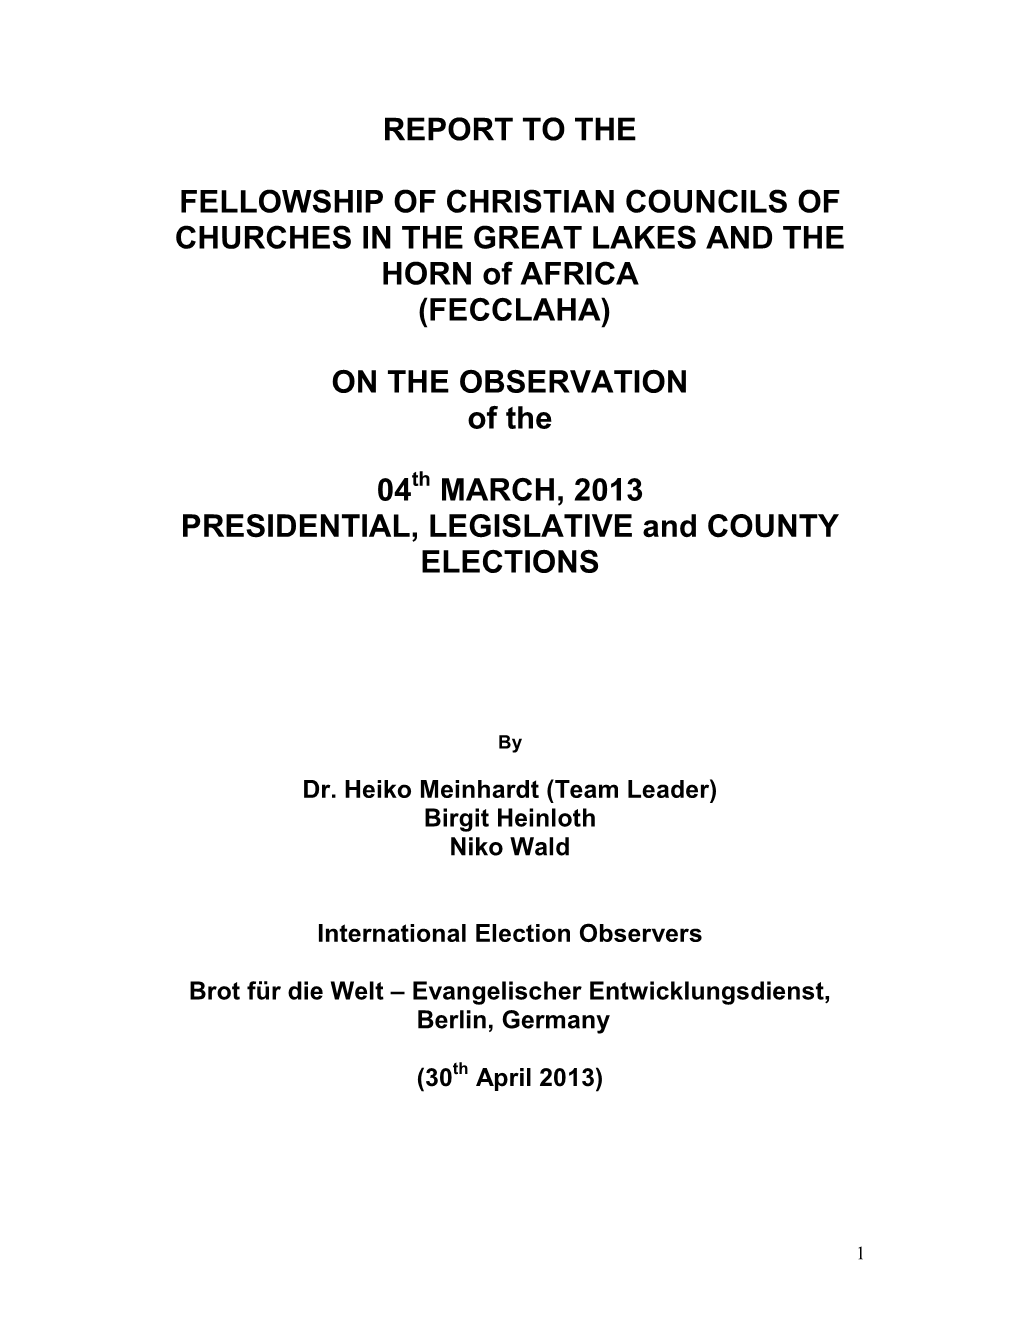 Report to the Fellowship of Christian